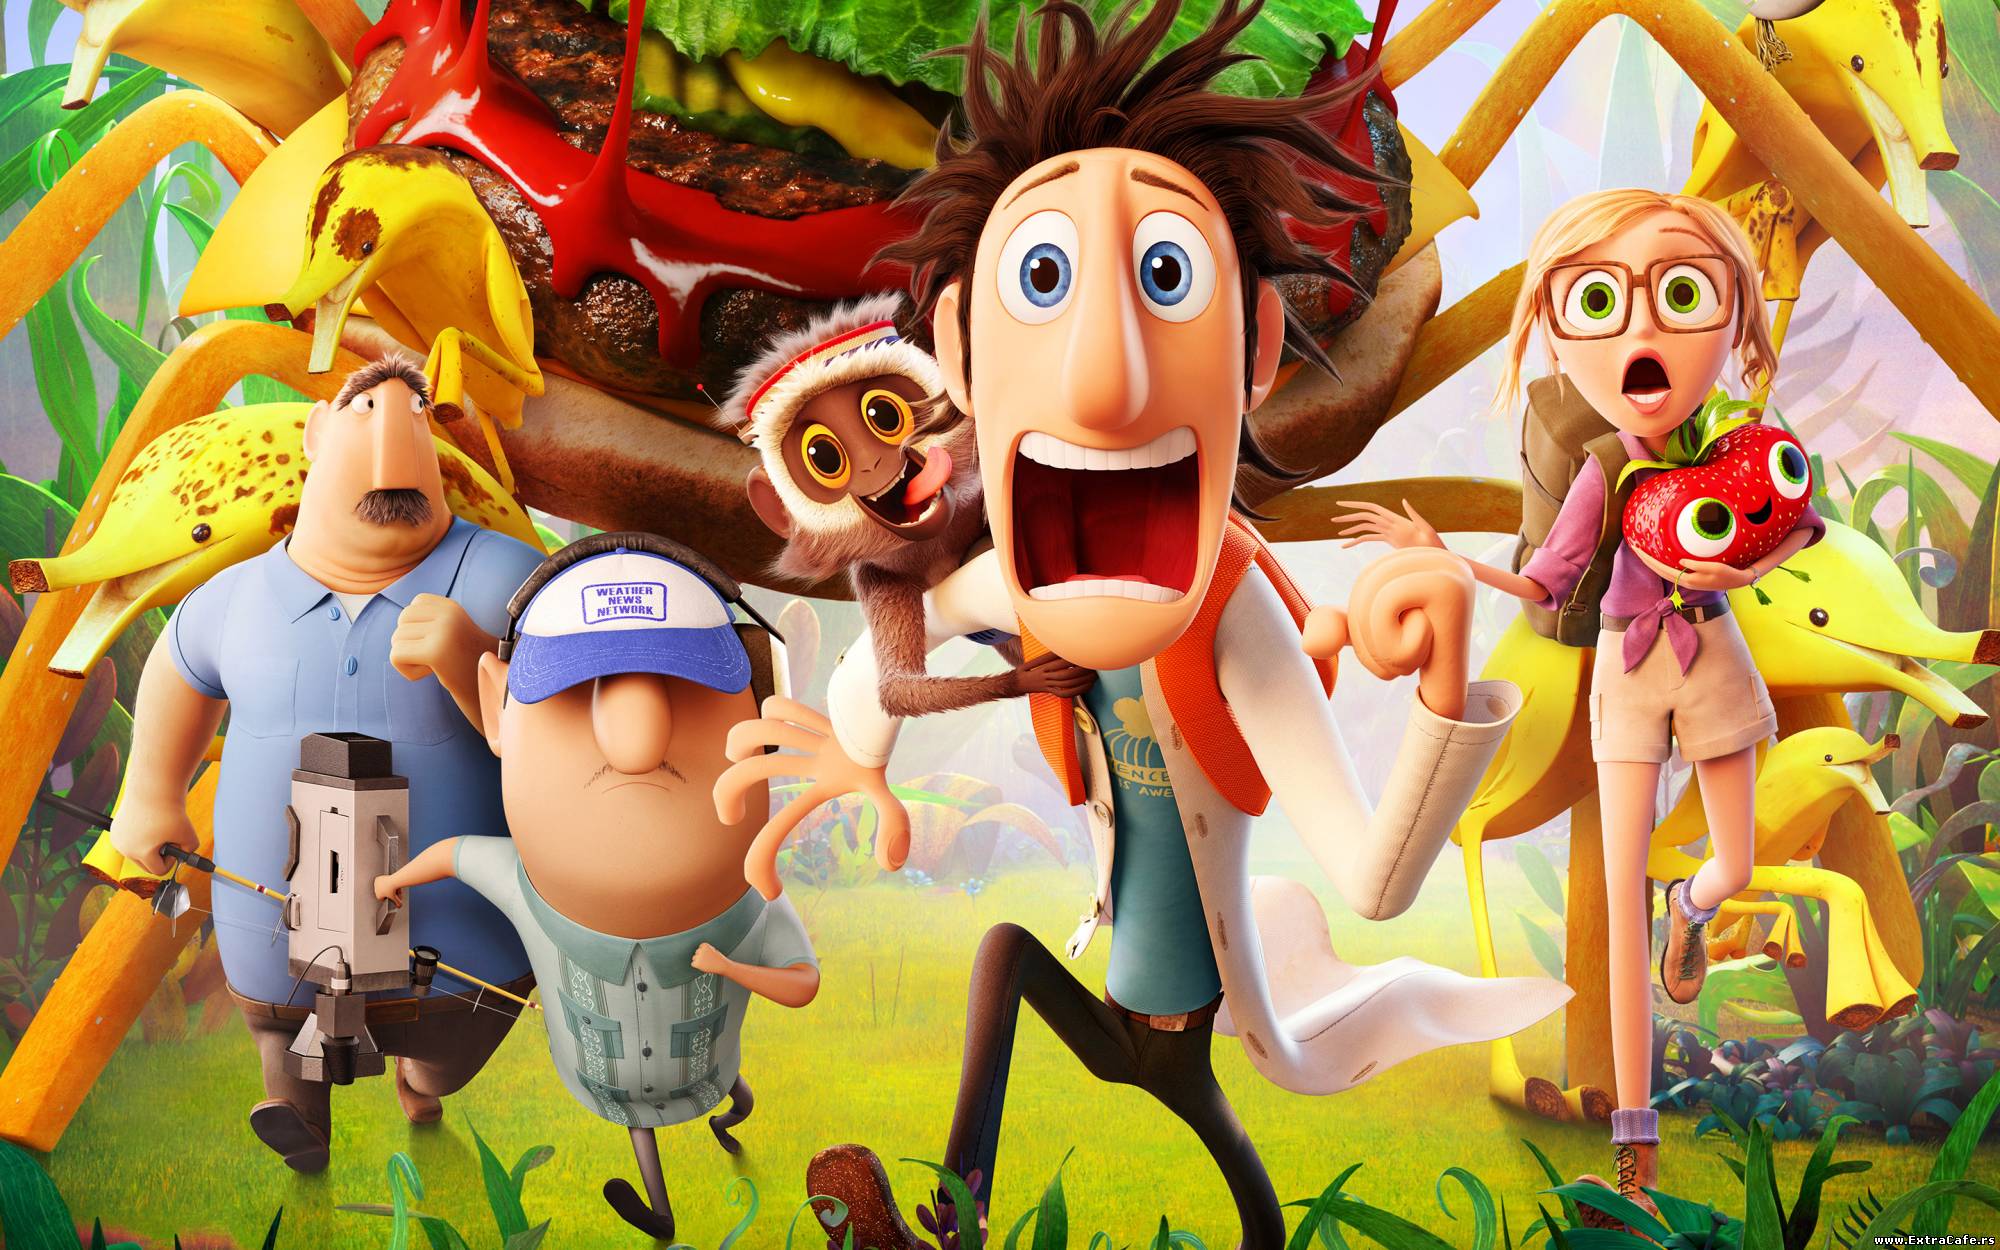 Slike iz Cloudy with a Chance of Meatballs 2 (2013)